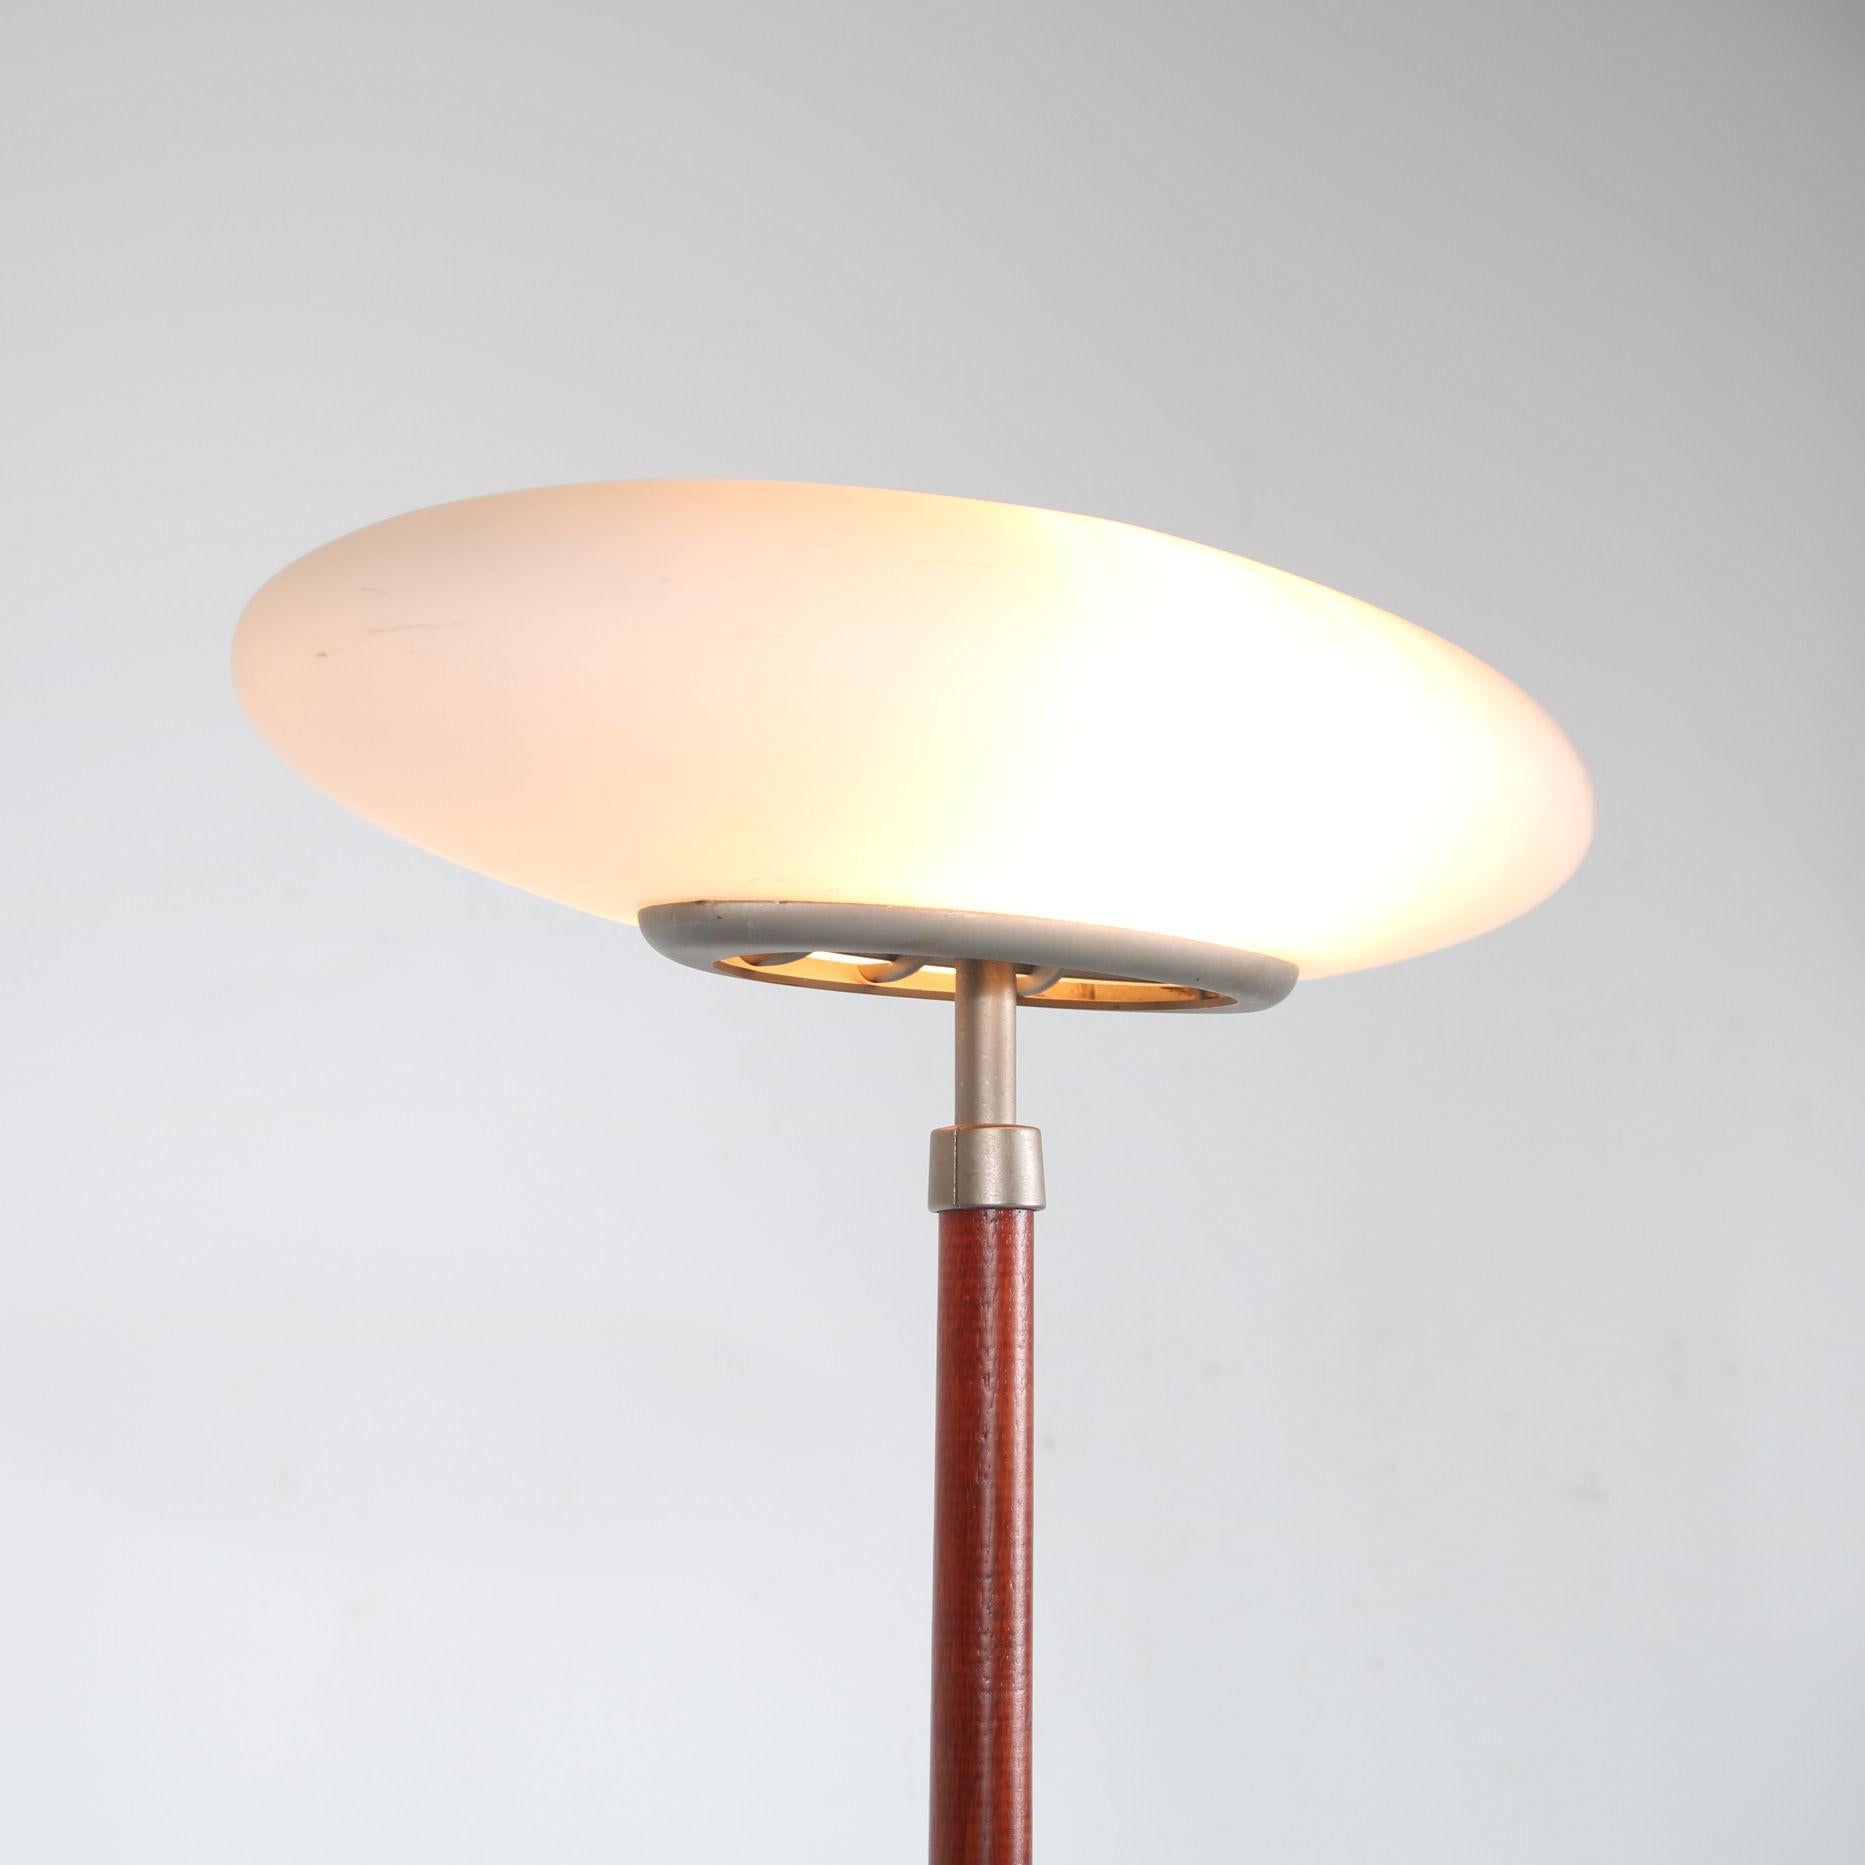 PAO Floor Lamp by Matteo Thun for Arteluce, Italy 1990 For Sale 5